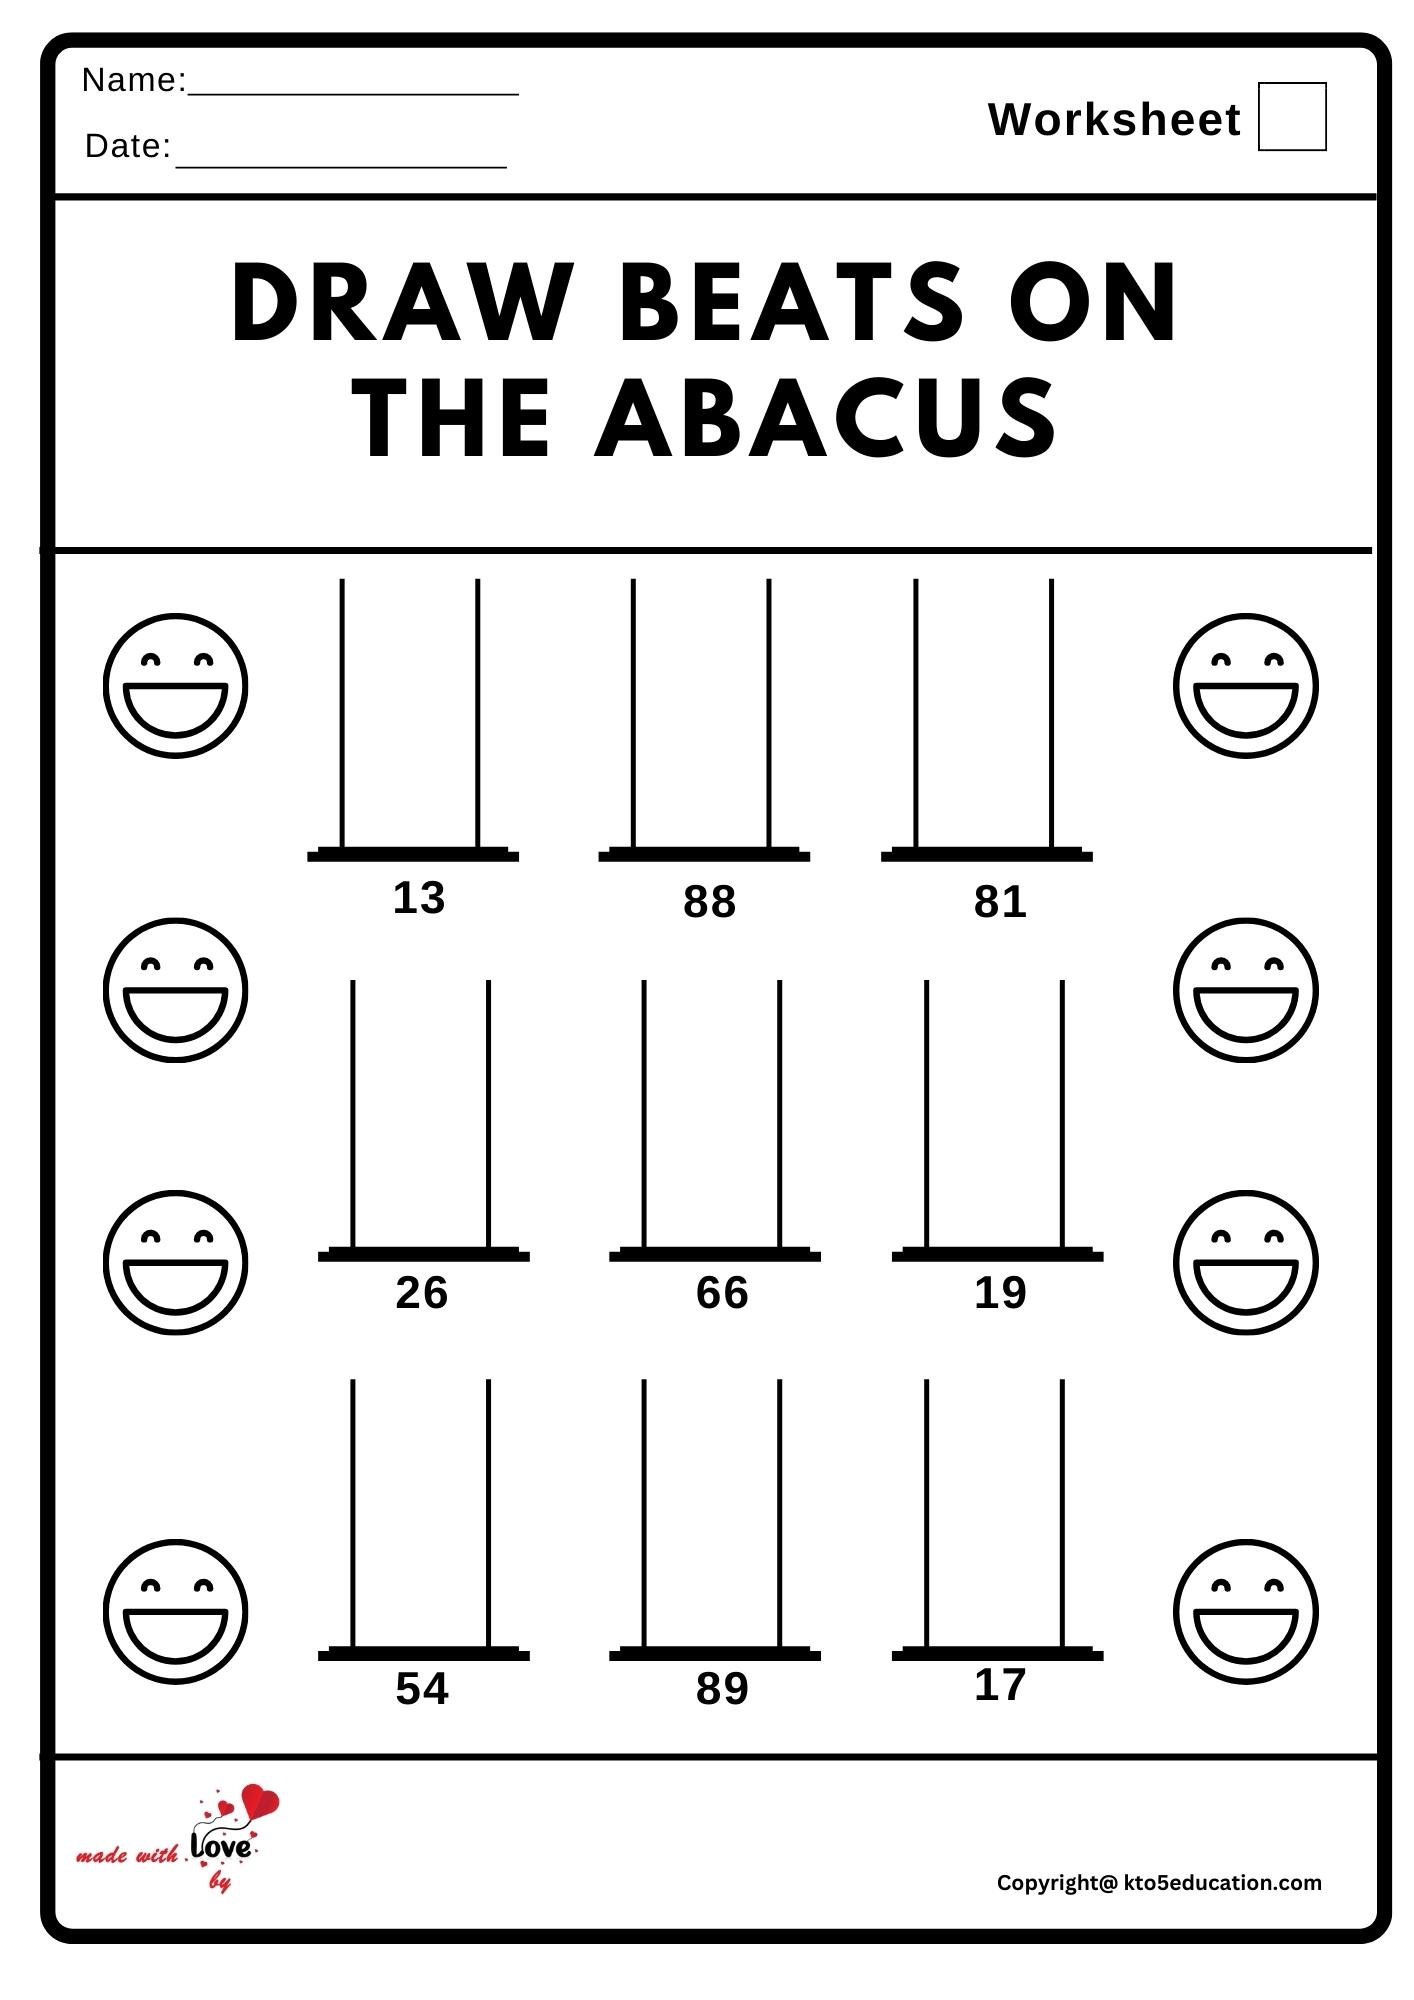 Draw Beats On The Abacas Worksheet